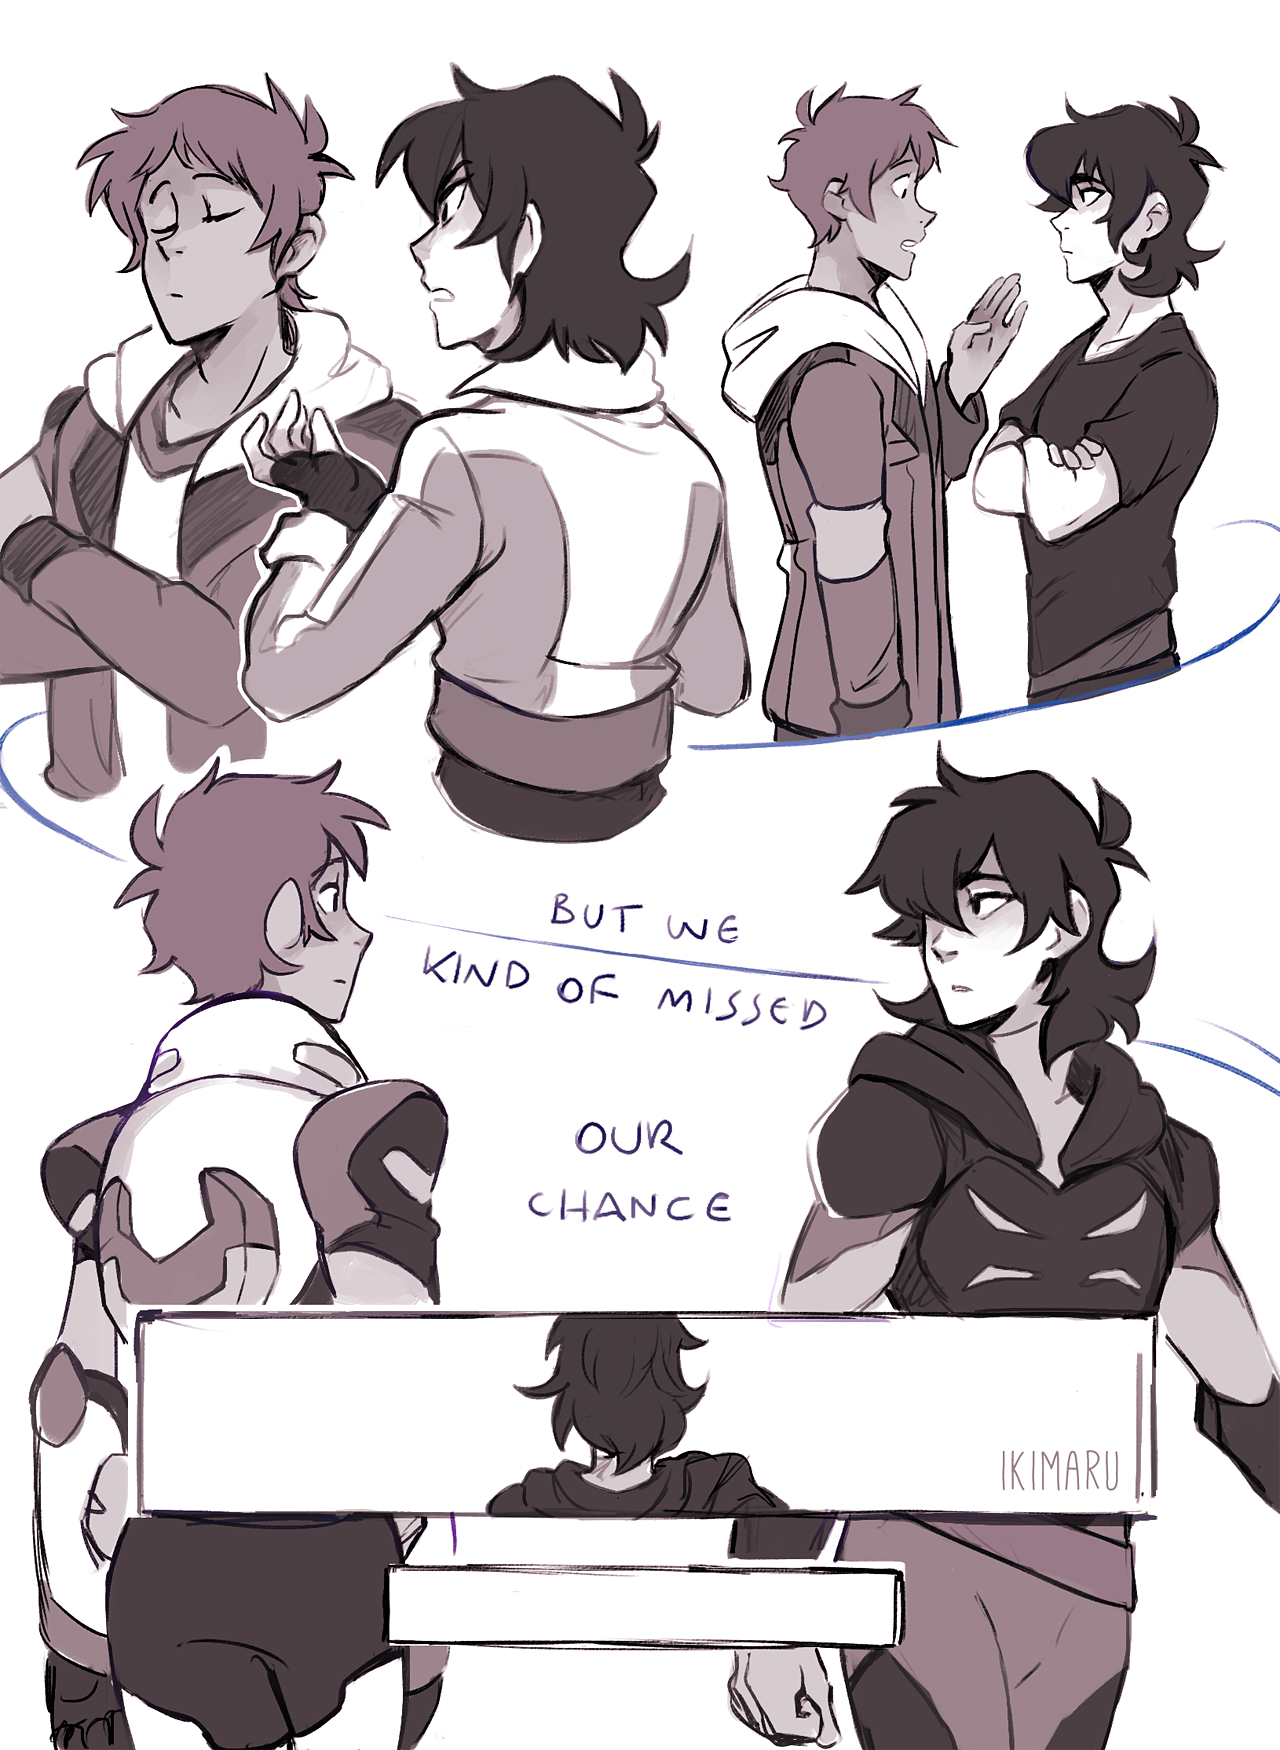 part 5 in which Lance is still thinking about it and Rachel has no time for that(she’s